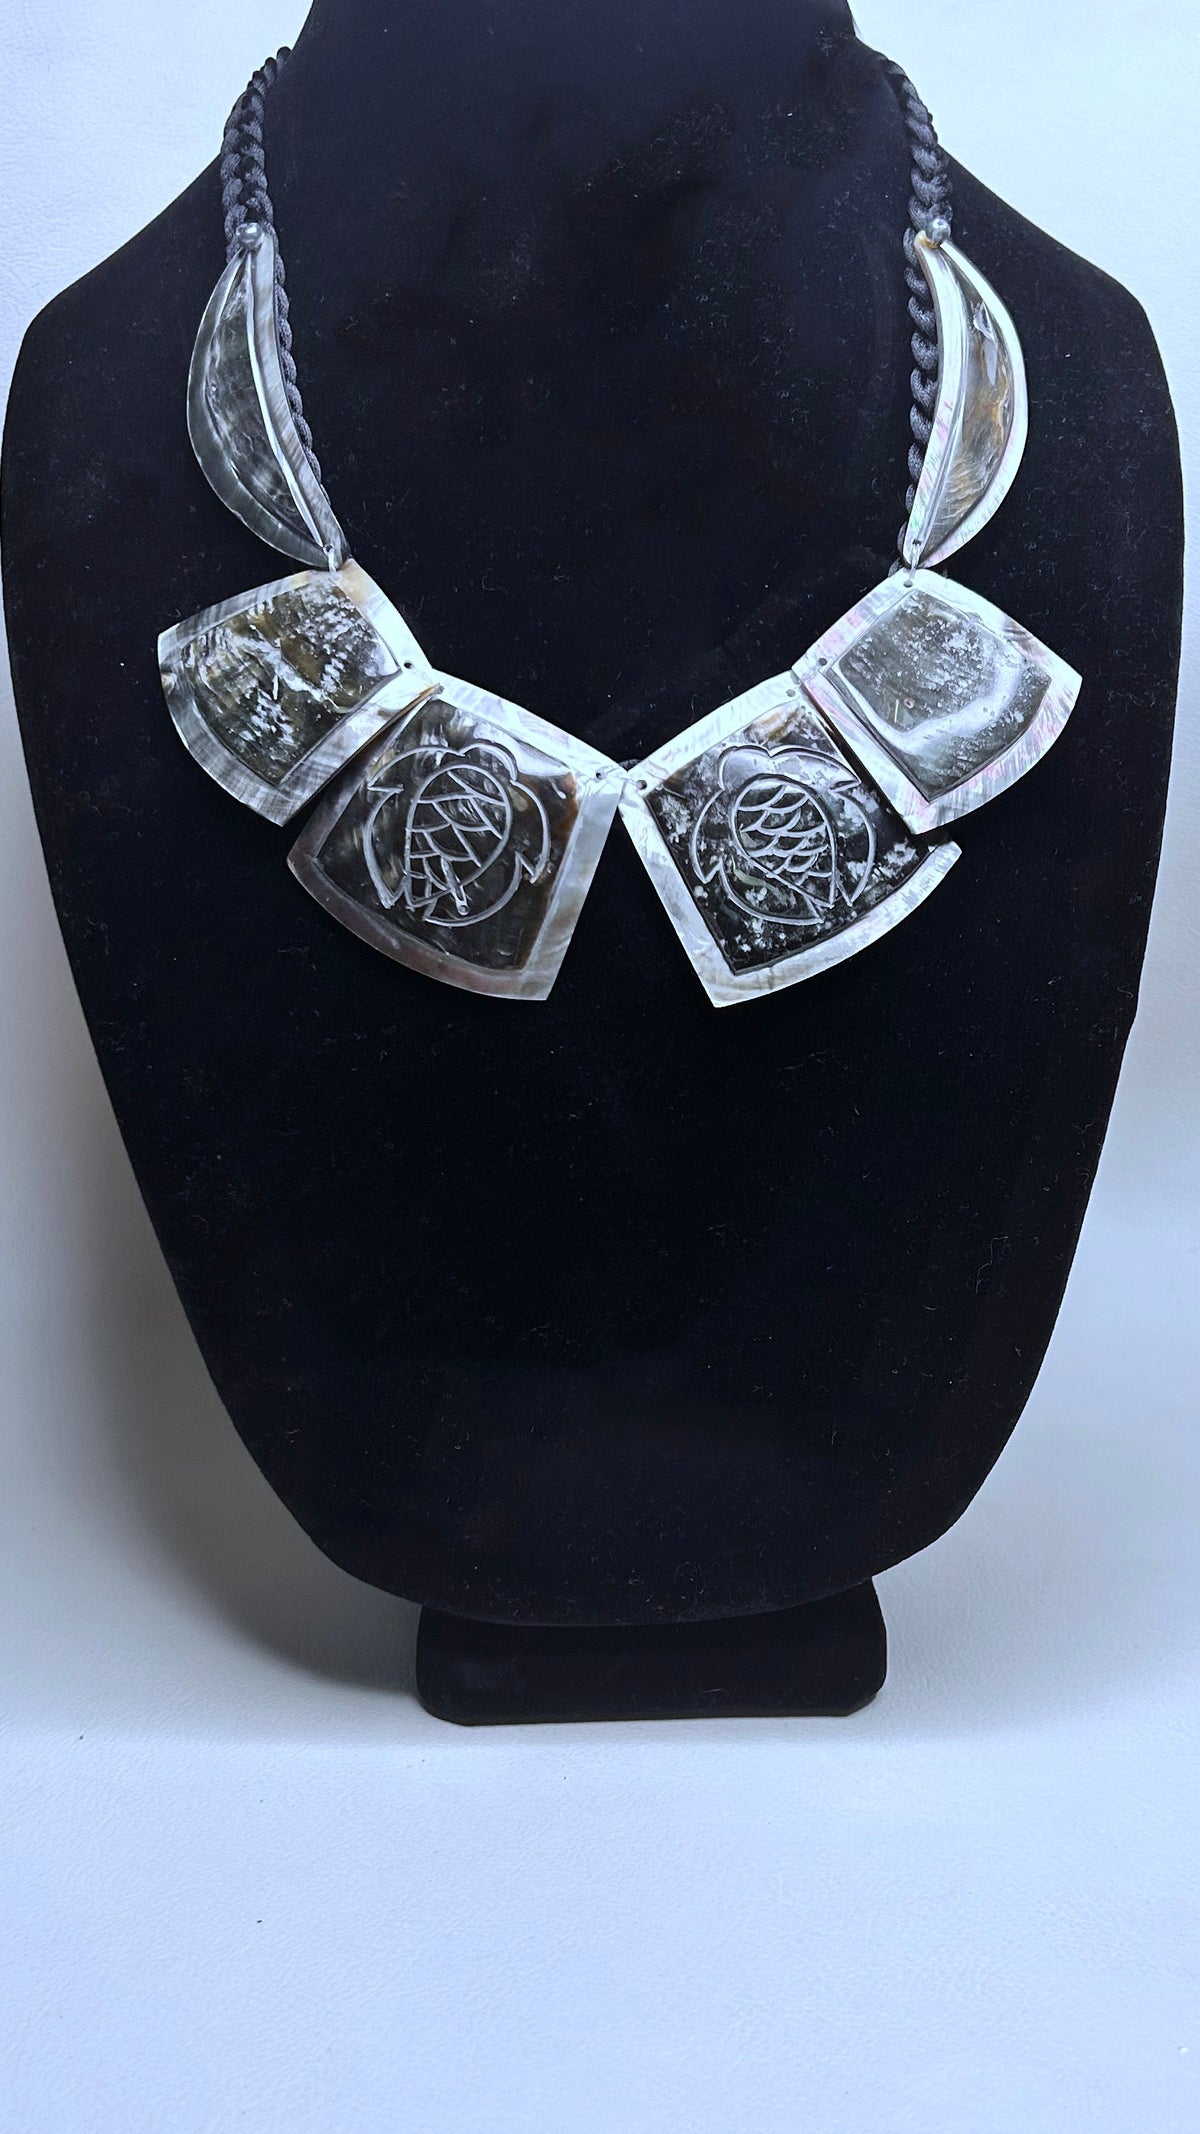 Honu mother of pearl necklace